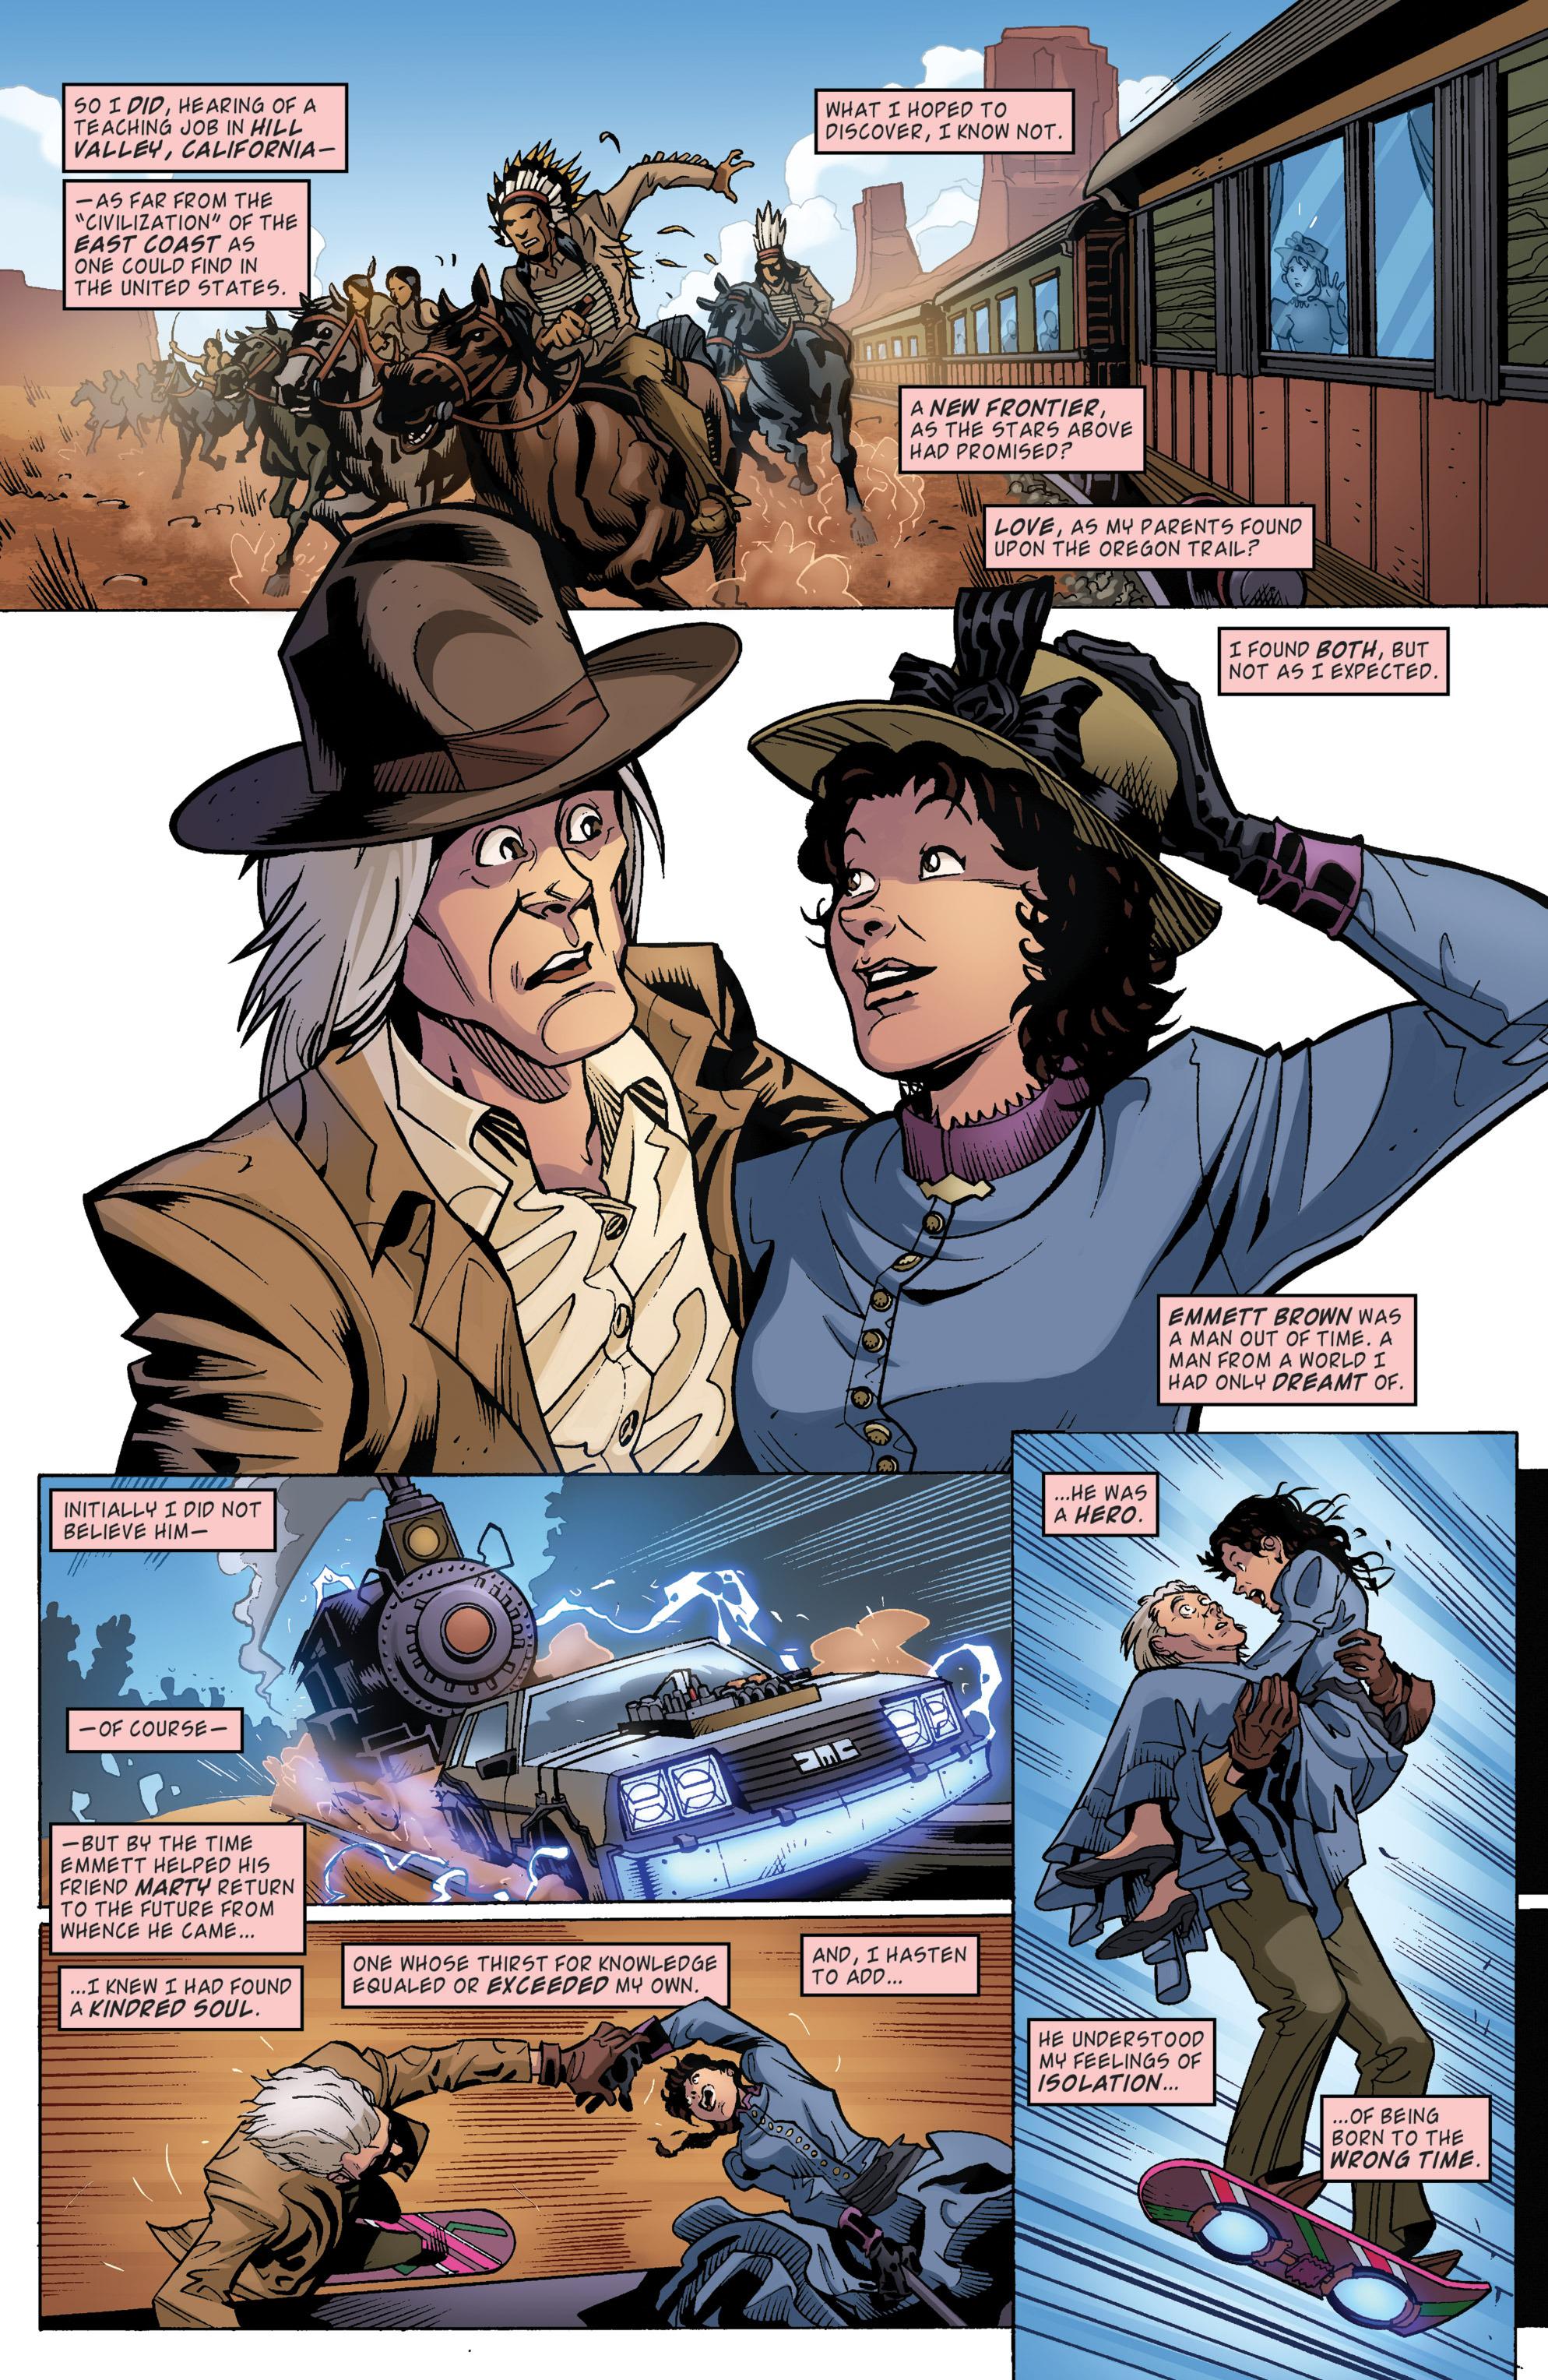 Back to the Future - Untold Tales and Alternate Timelines review